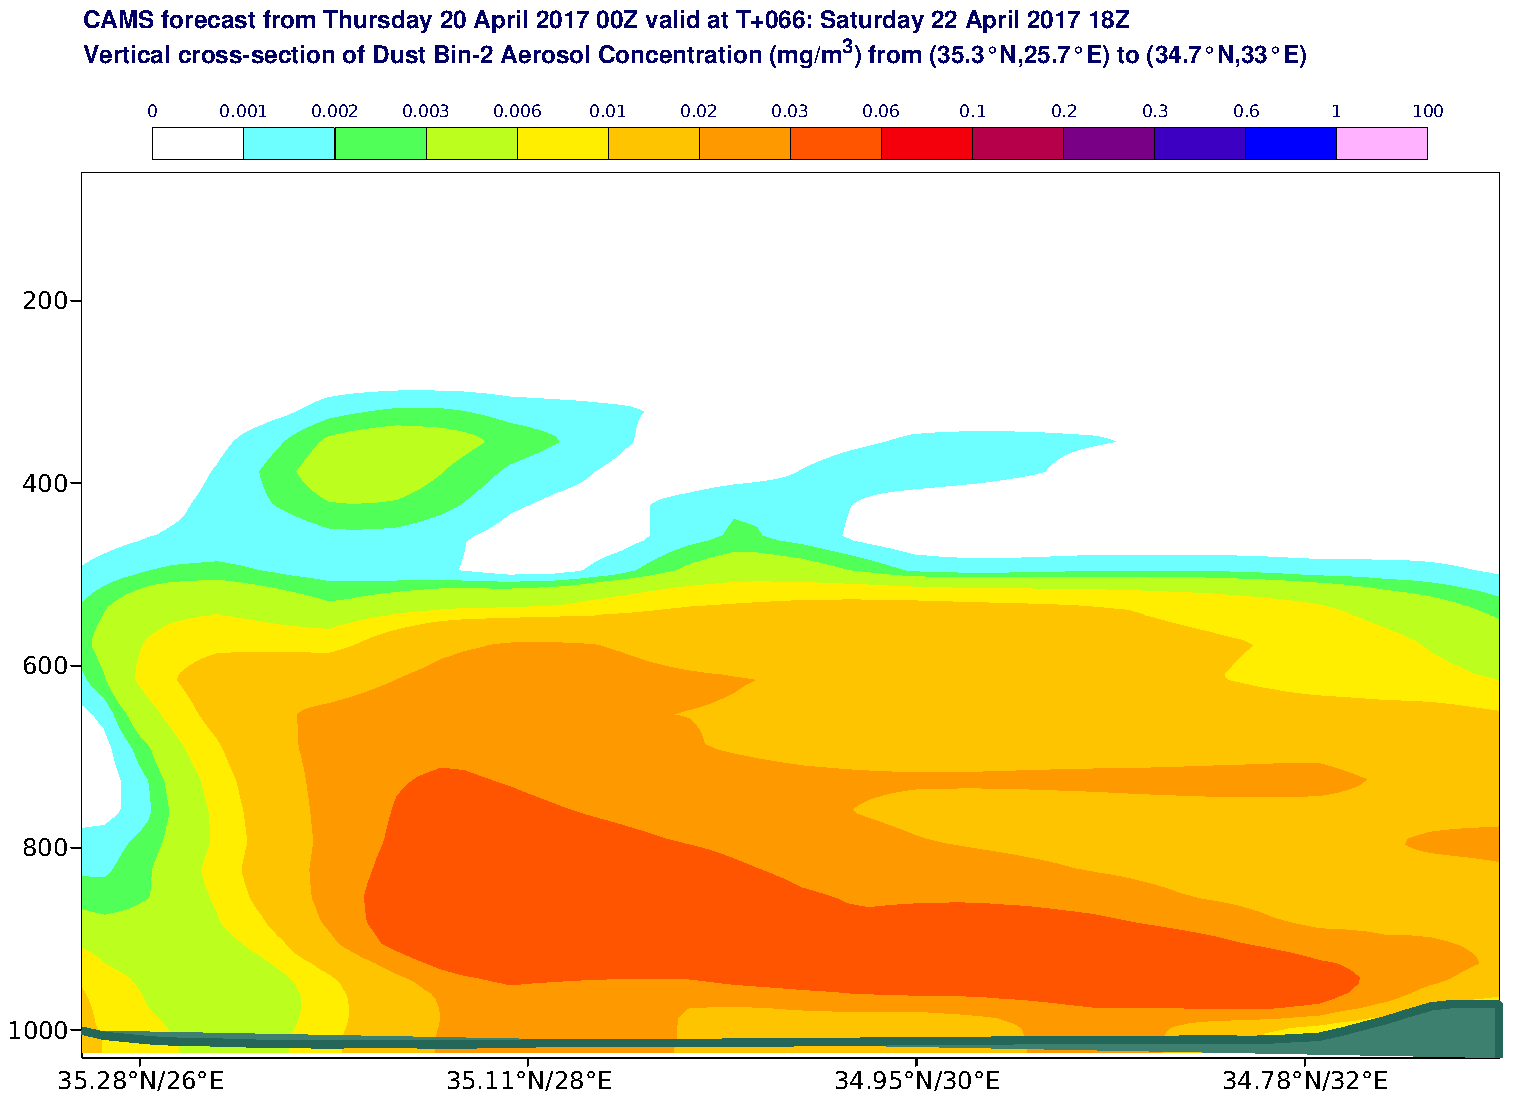 Vertical cross-section of Dust Bin-2 Aerosol Concentration (mg/m3) valid at T66 - 2017-04-22 18:00